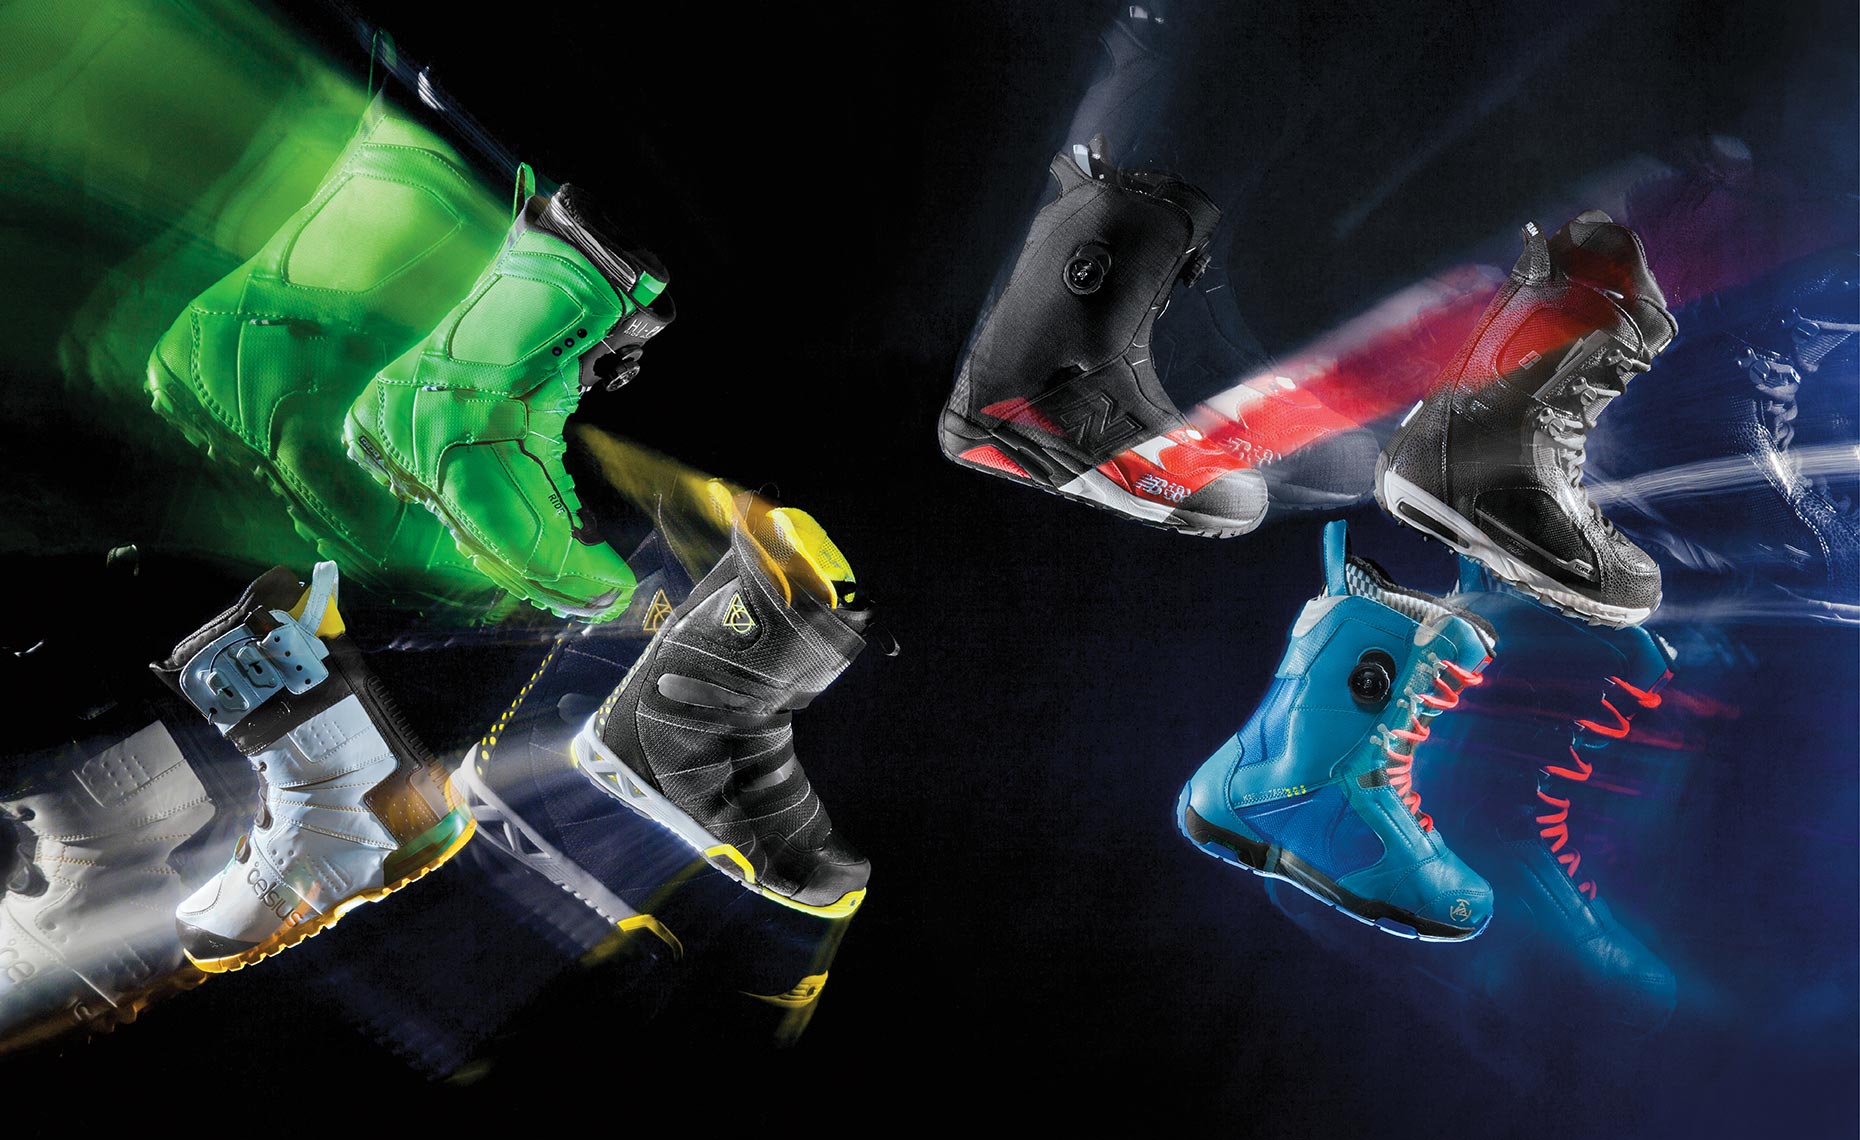 04_Snowboarding_Boots_Product_Chris_Wellhausen_Photography-DUP.JPG